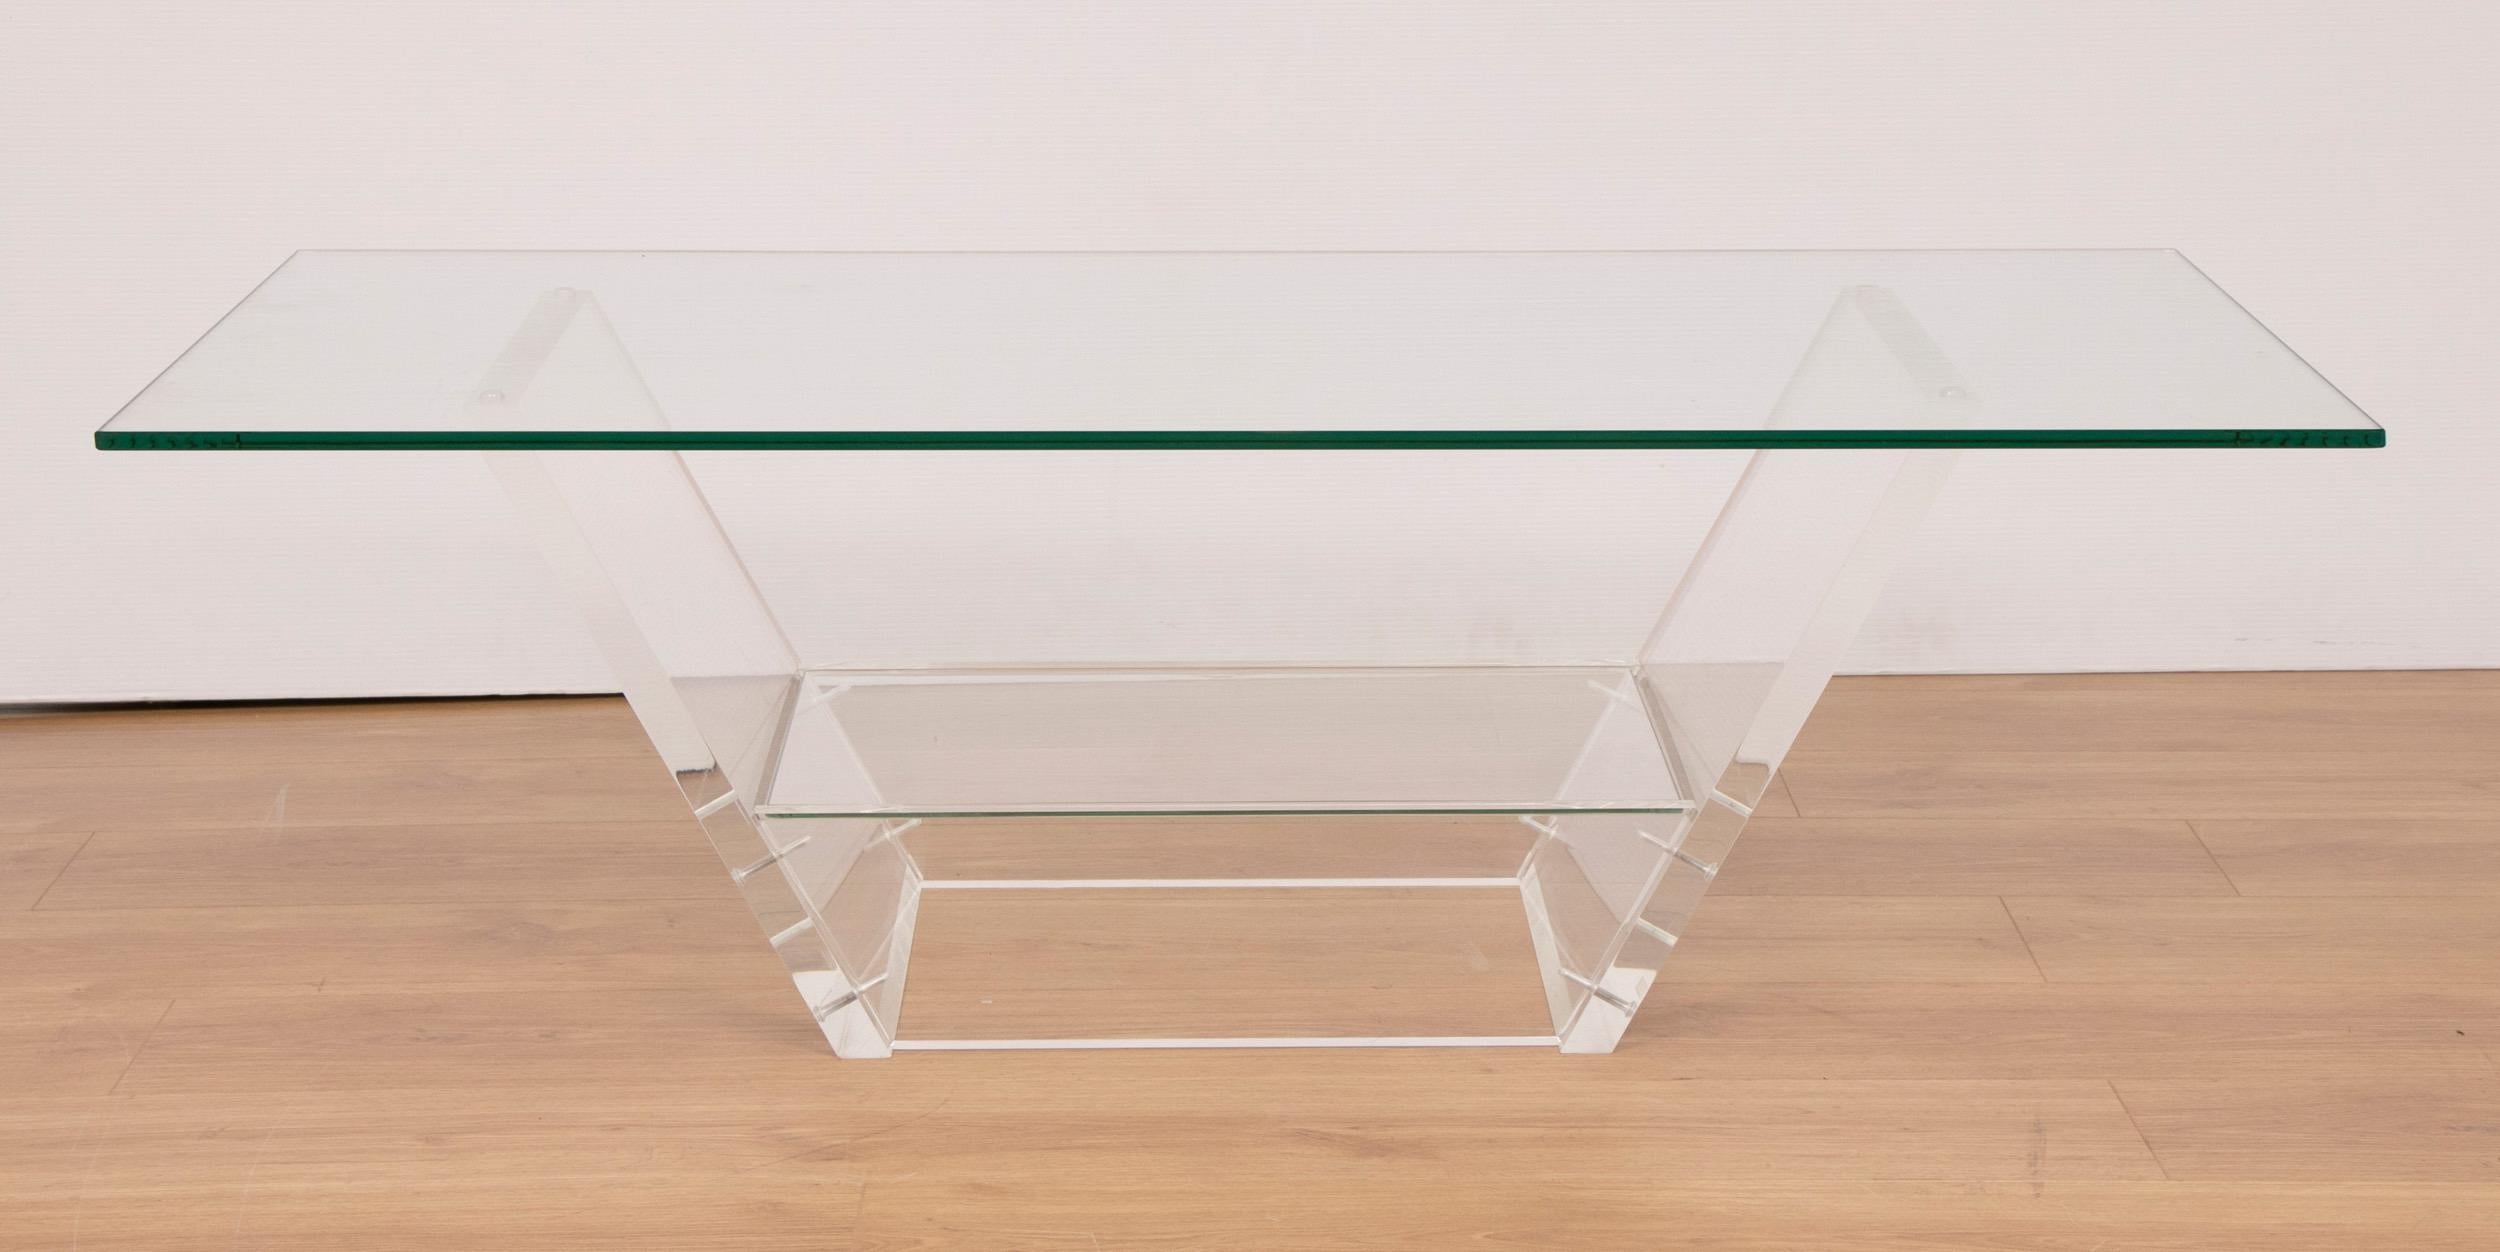 Midcentury streamline table in acrylic and glass
Designed by David Lange for the Metz Department Store, Amsterdam
Measures: H 36cm, W 115cm, D 64cm
French, circa 1972
Designer label attached.